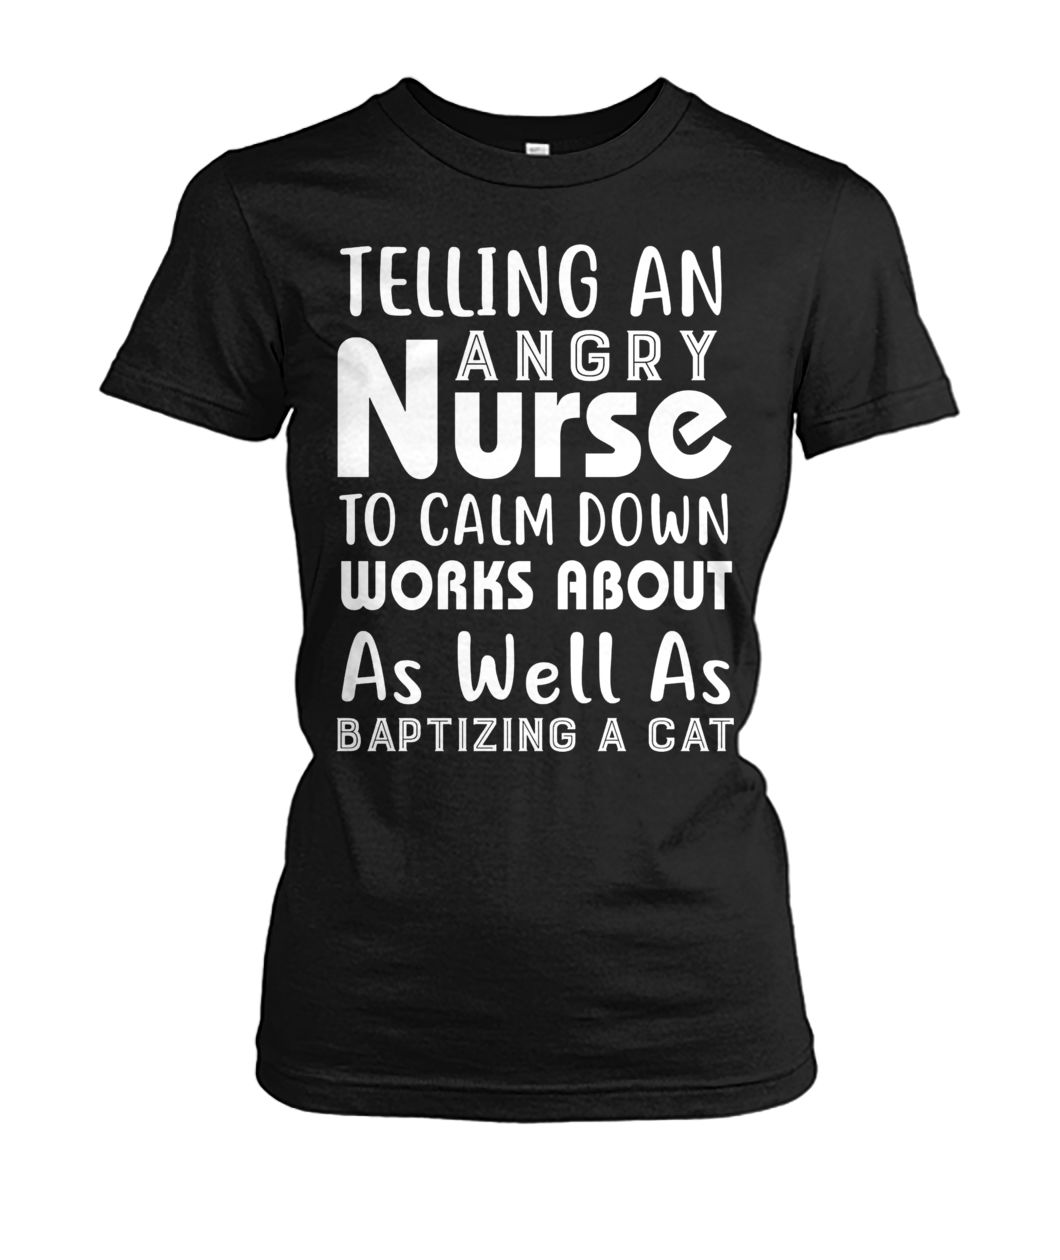 Telling an angry nurse to clam down workds about as well as baptizing a cat women's cew tee